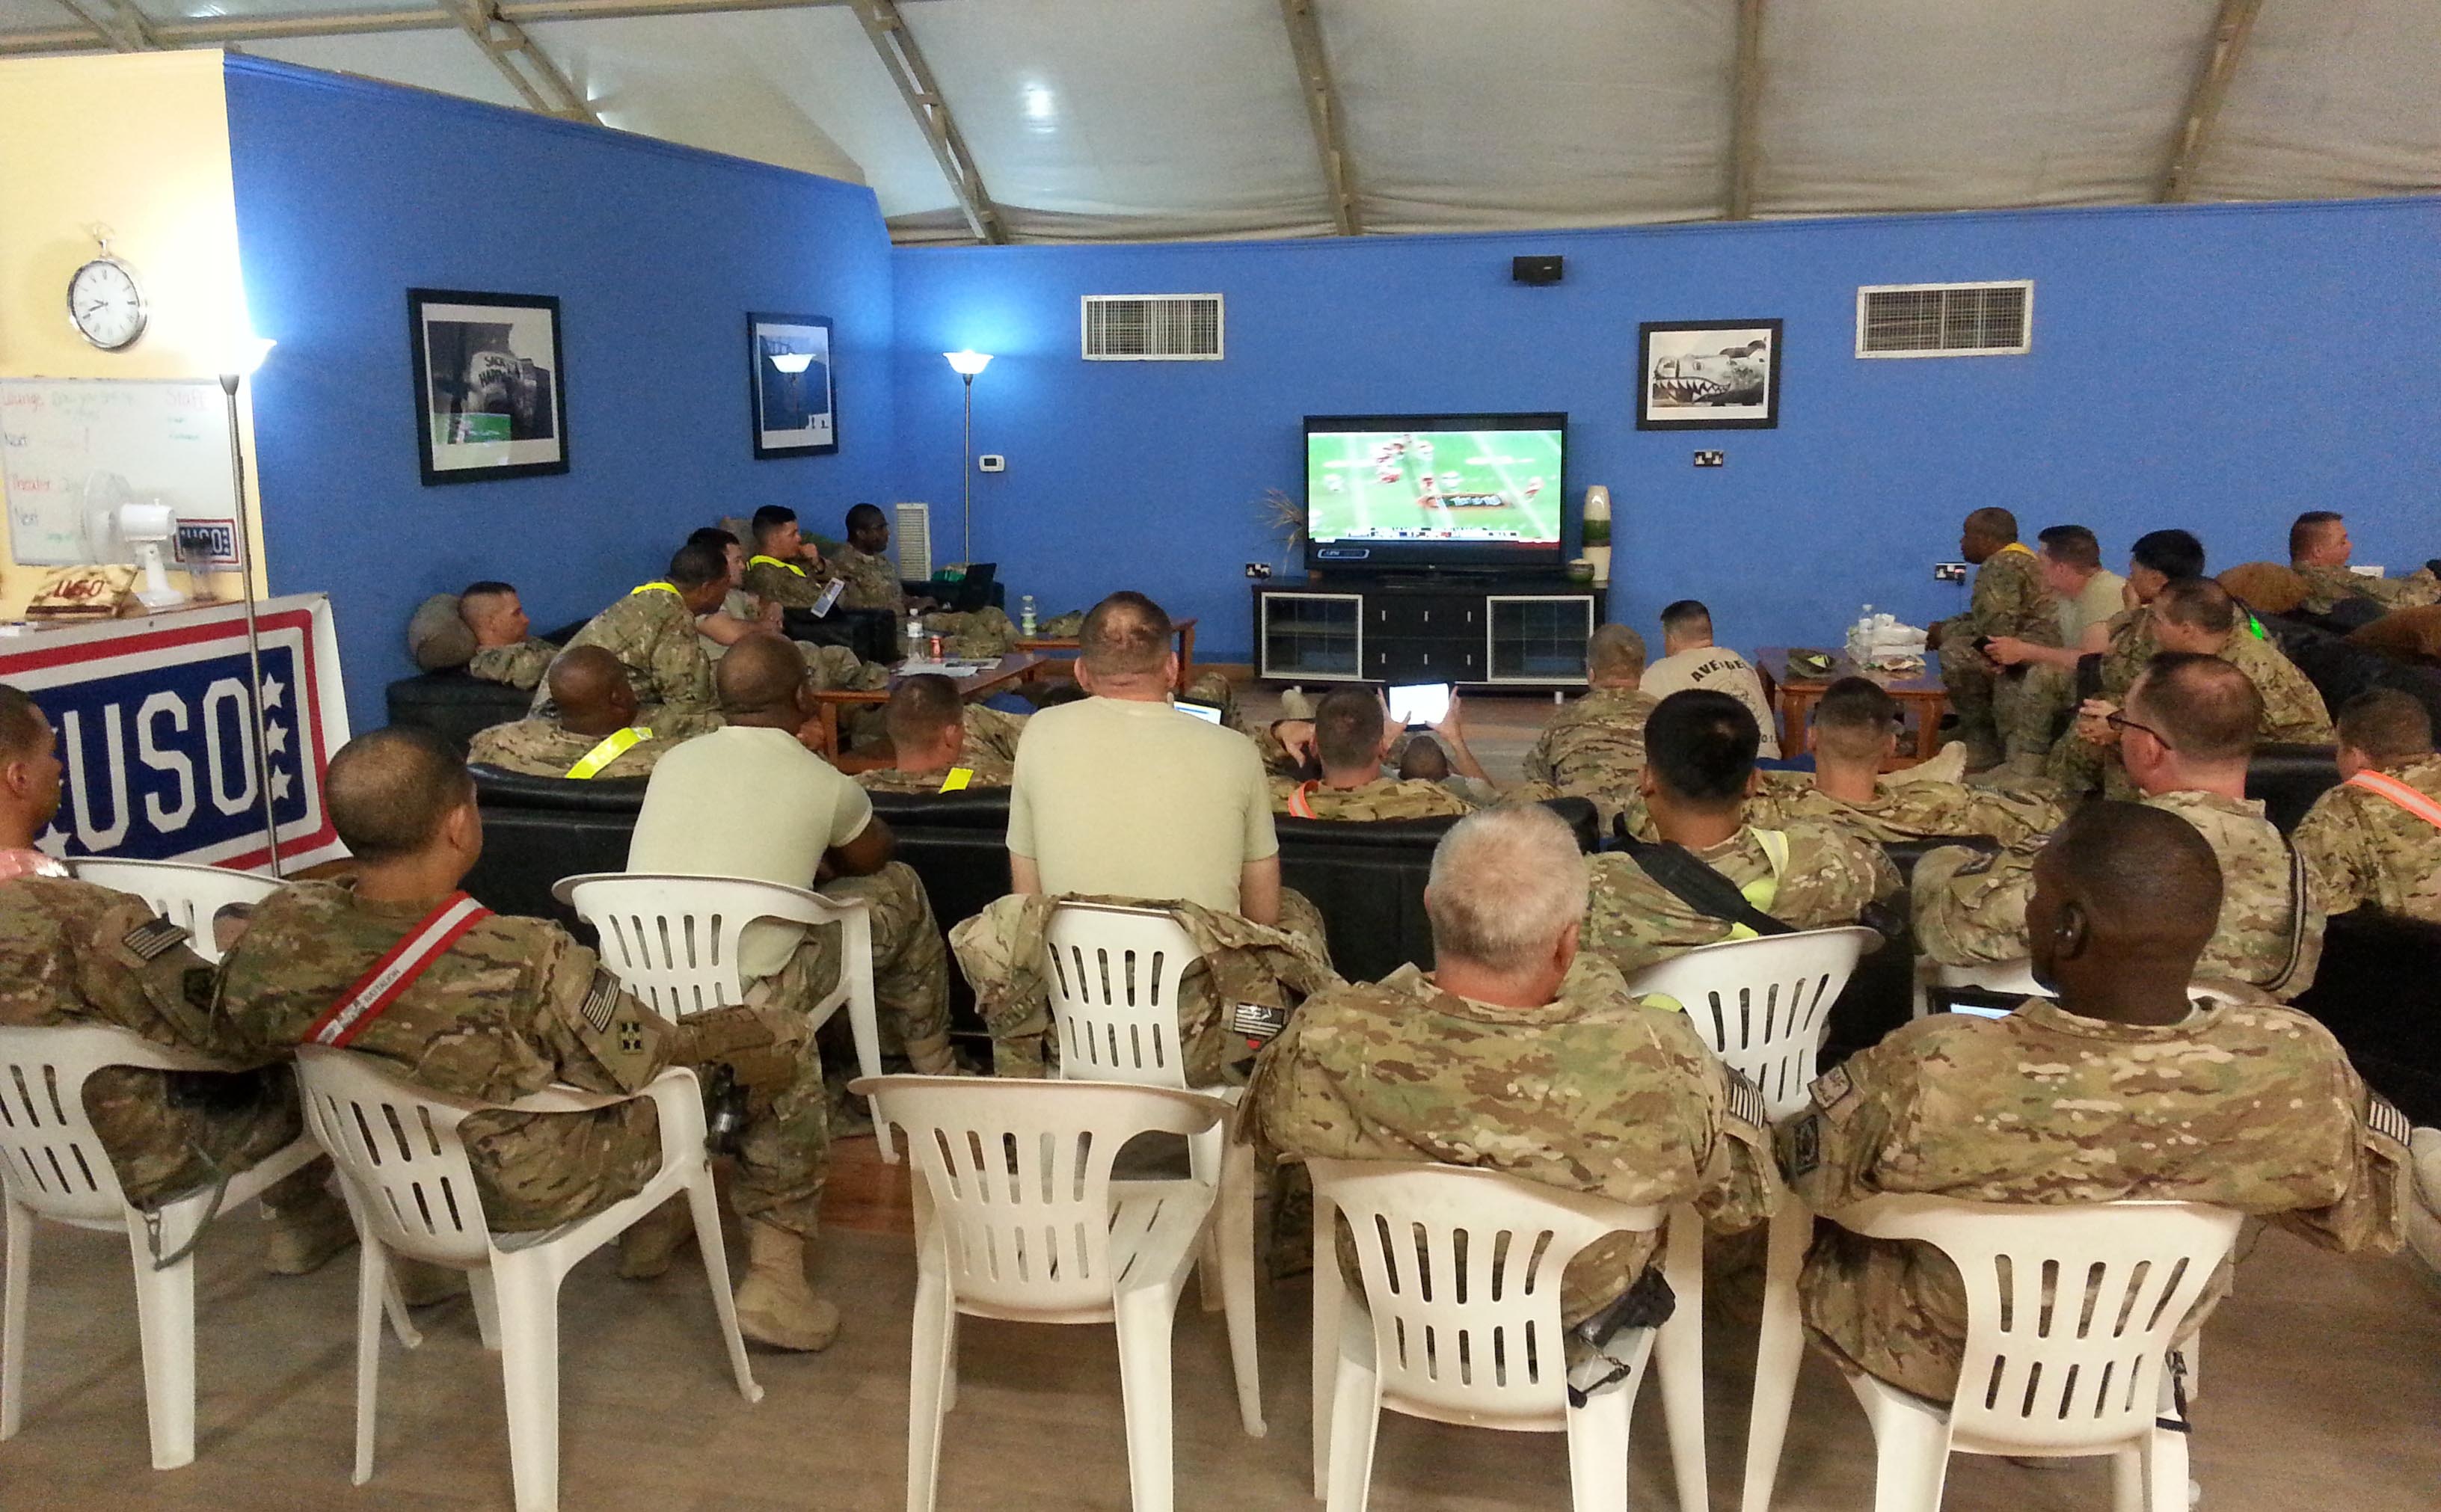 Troops gather at USO Kandahar in Afghanistan to watch football, courtesy of NFL Game Pass. USO photos by Daniel Wood